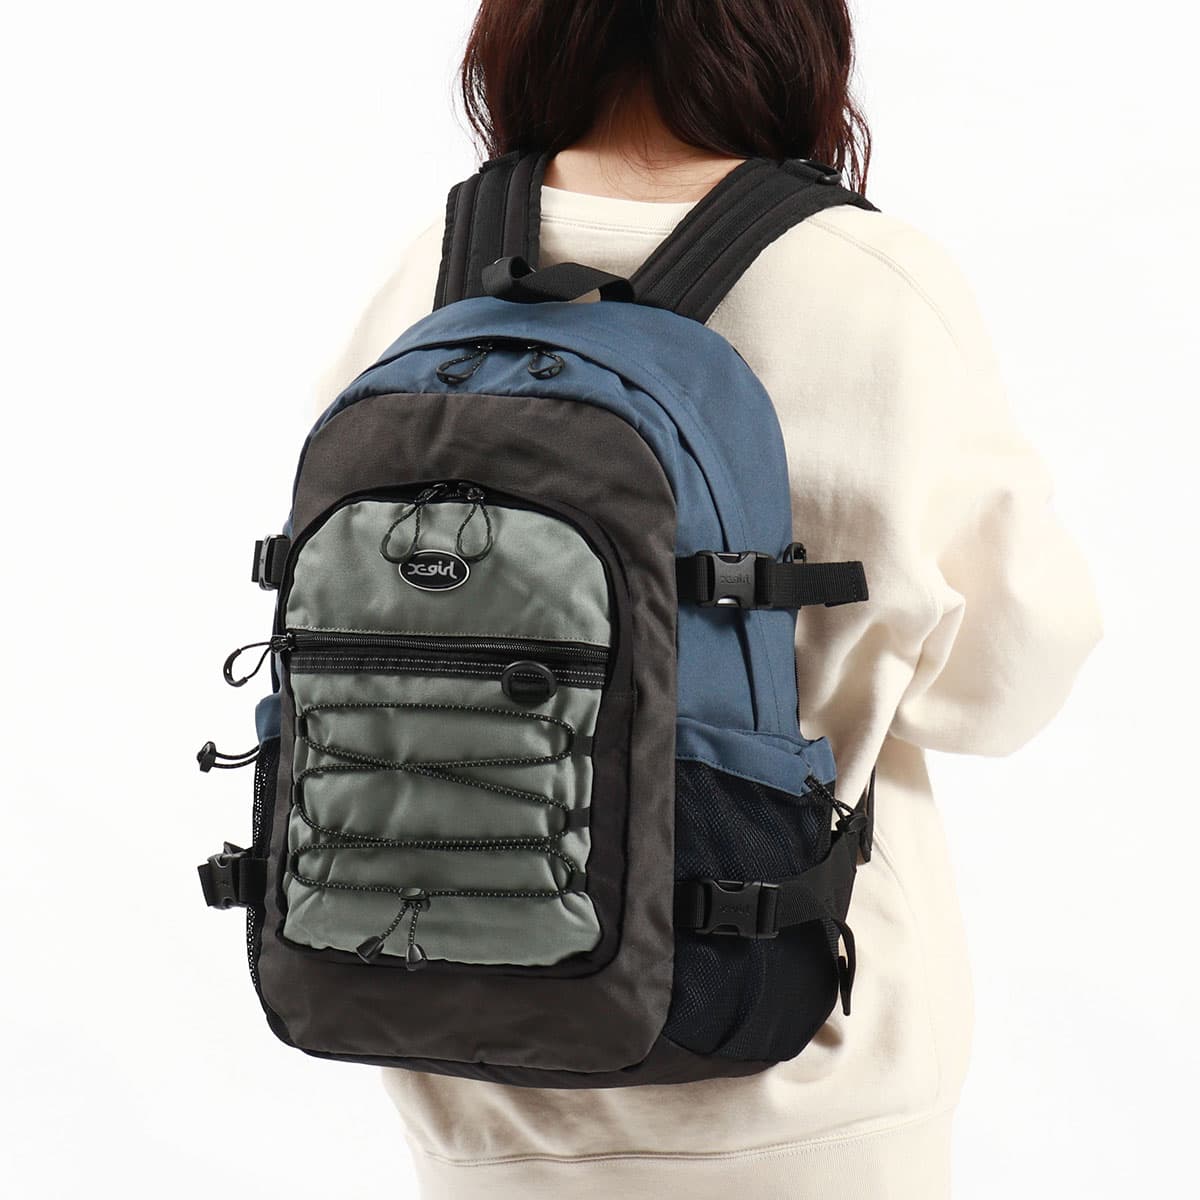 X-girl エックスガール BUNGEE CORD BACKPACK リュックサック 28L 